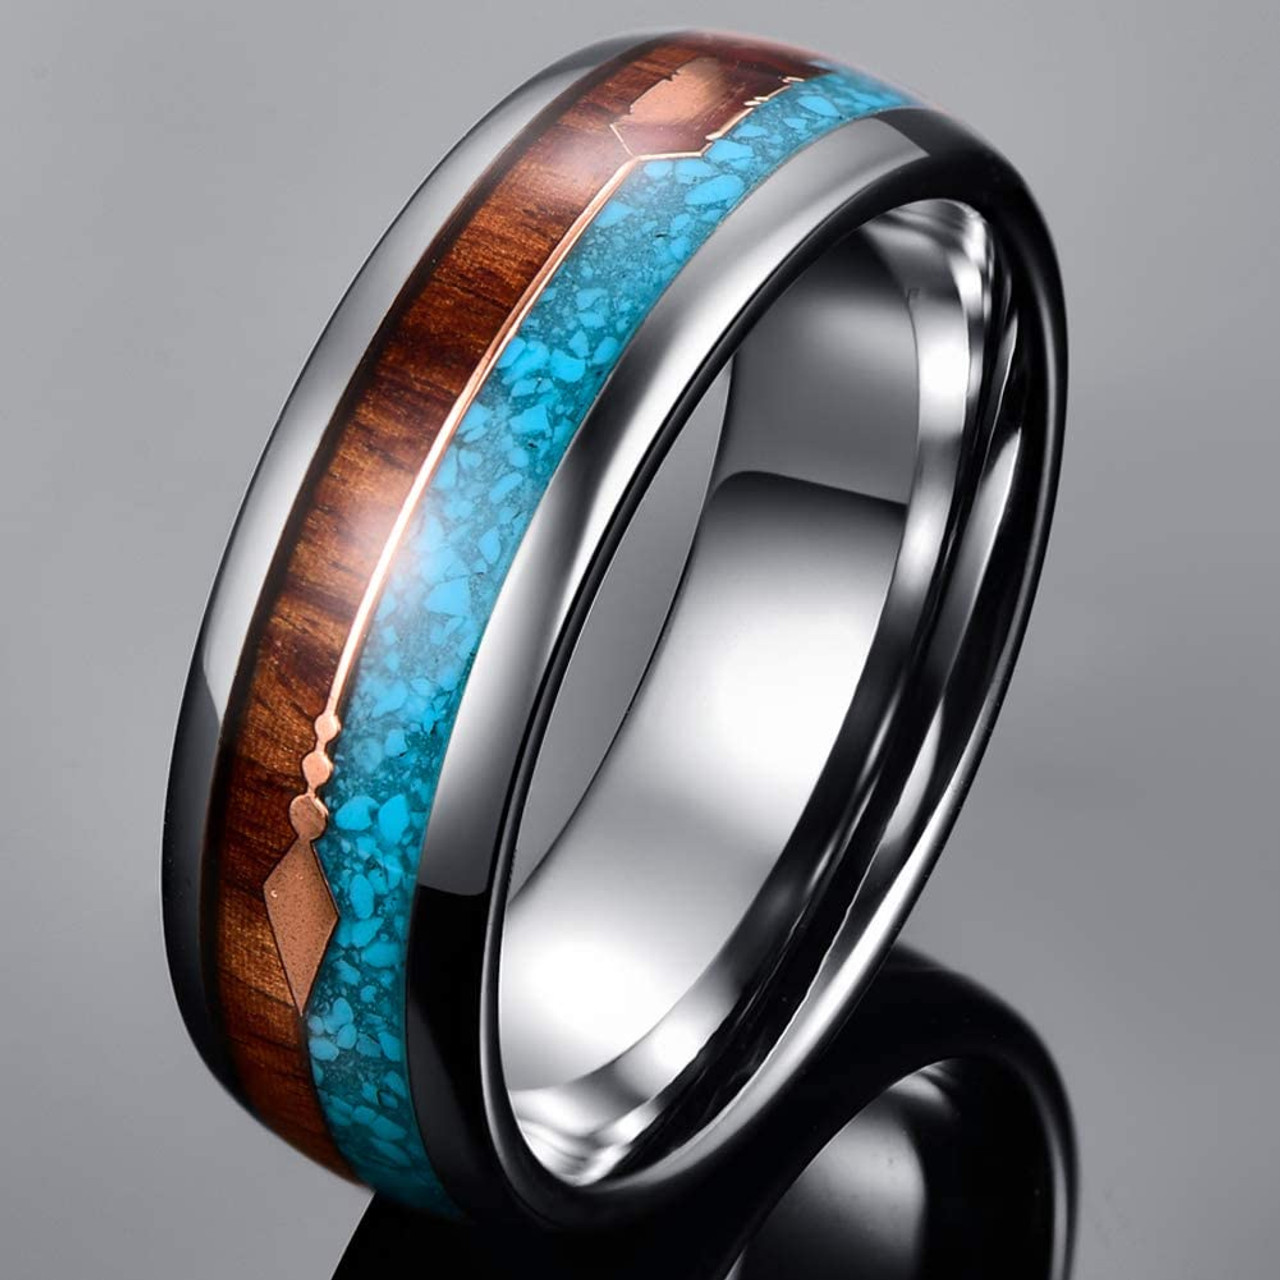 8mm Hawaiian Koa Wood and Turquoise Inlay Tungsten Wedding Rings with Rose  Gold Arrow Comfort Fit Size 7-12